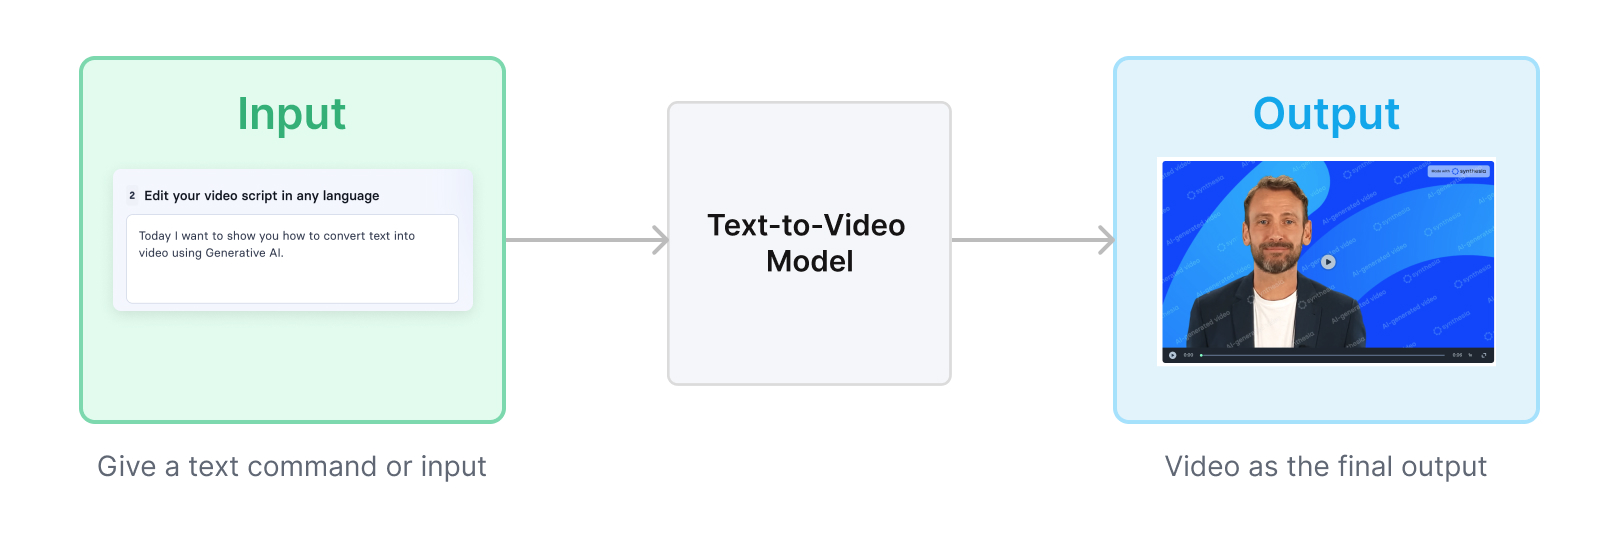 text to video model example